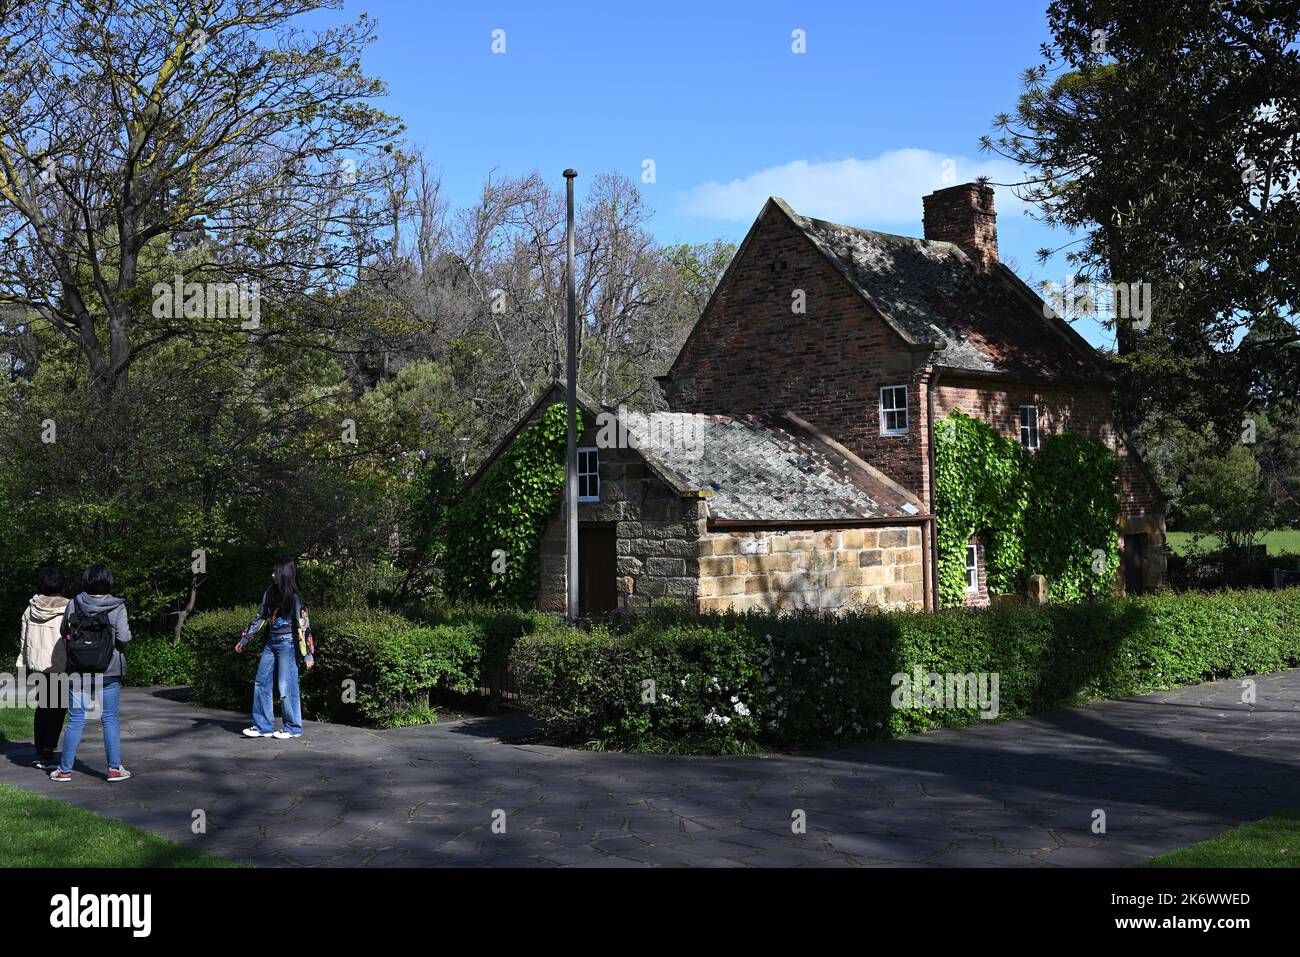 Cook's Cottage amongst the trees of Fitzroy Gardens, as a visitor poses for a photograph in front of the historical landmark Stock Photo